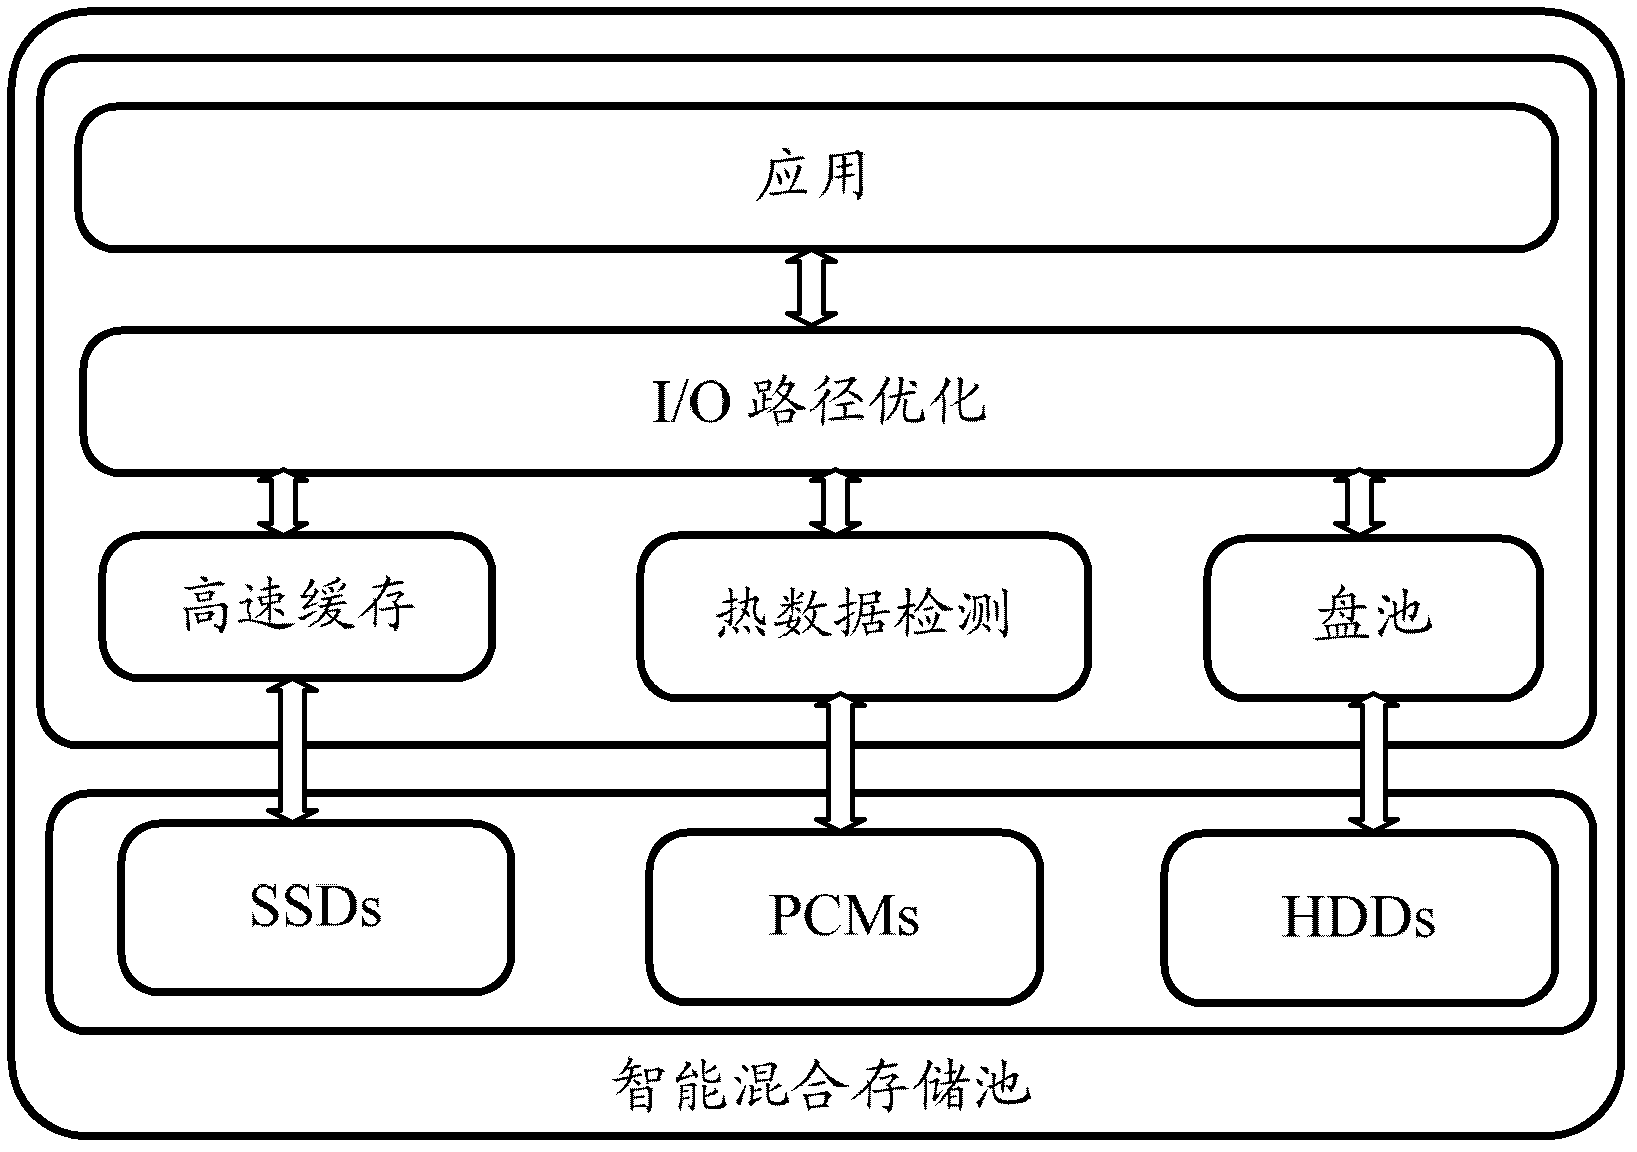 Method and system for configurating memory device under hybrid storage environment